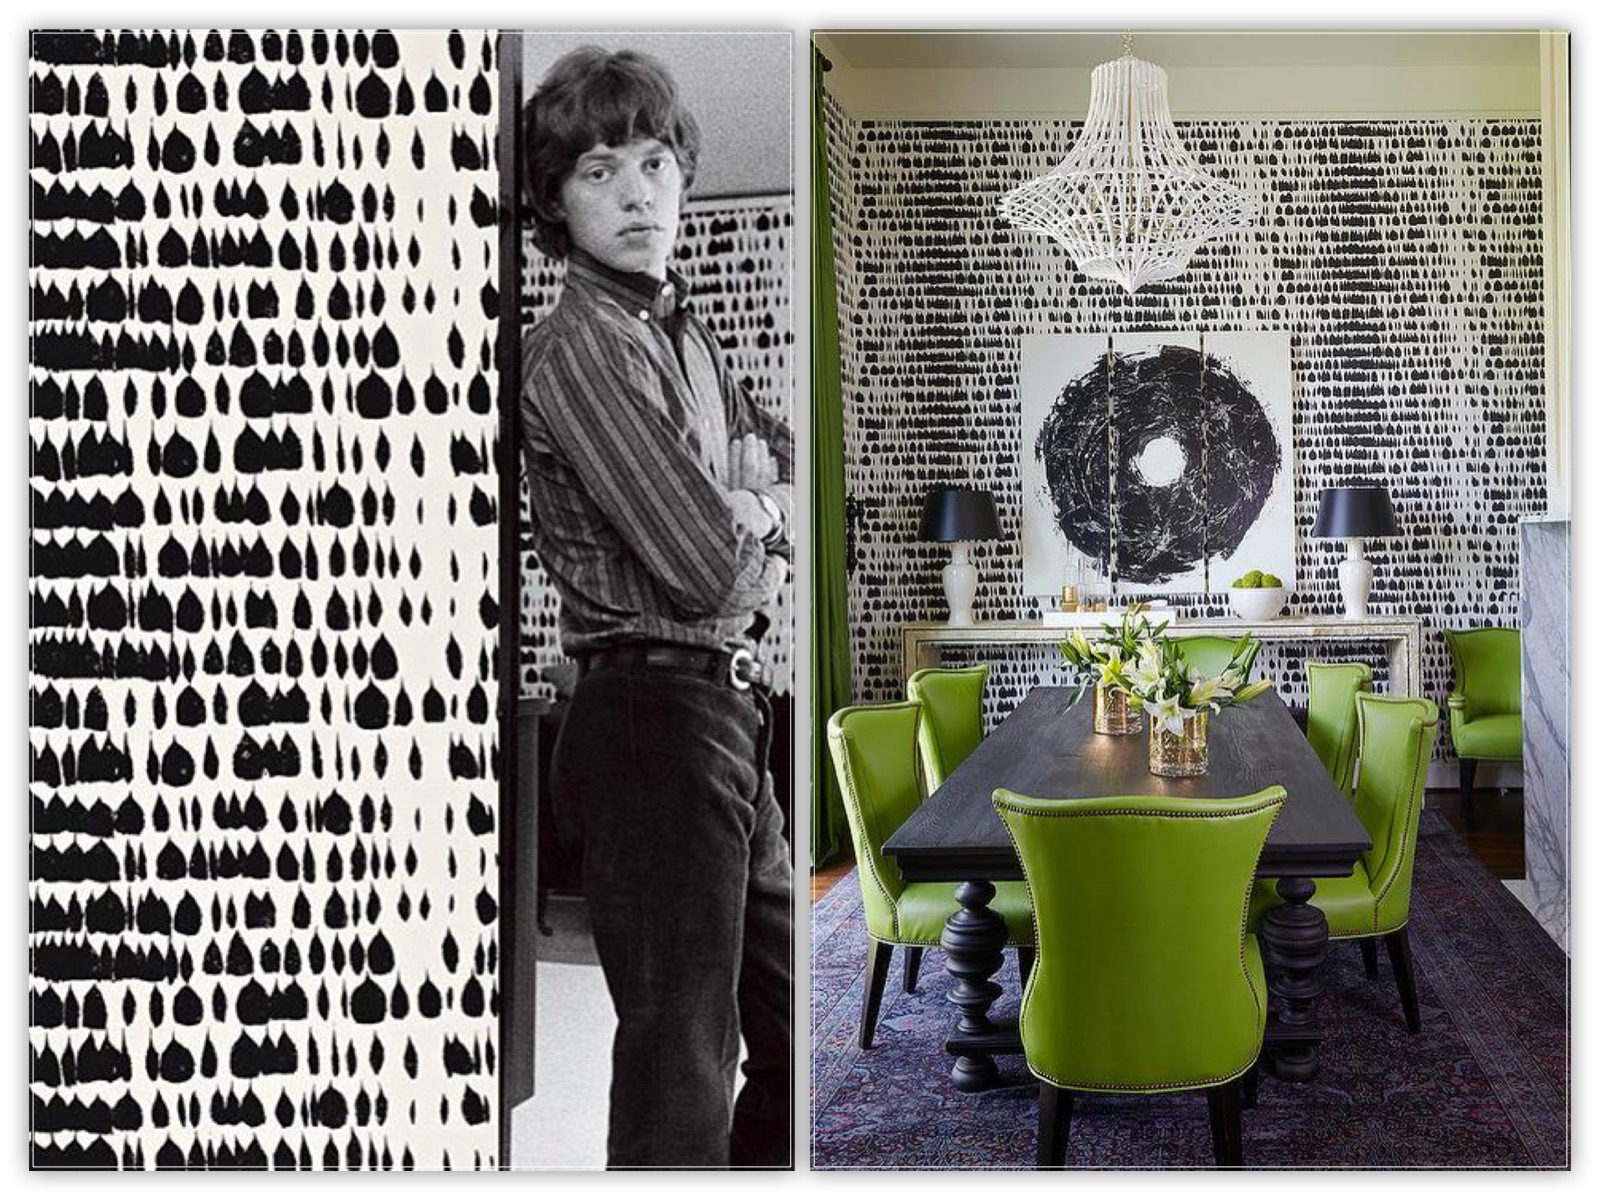 A young Mick Jagger Stand s in front of queen of spain Wallpaper (schumacher) in the 1960's and a recent dining room done in the same paper